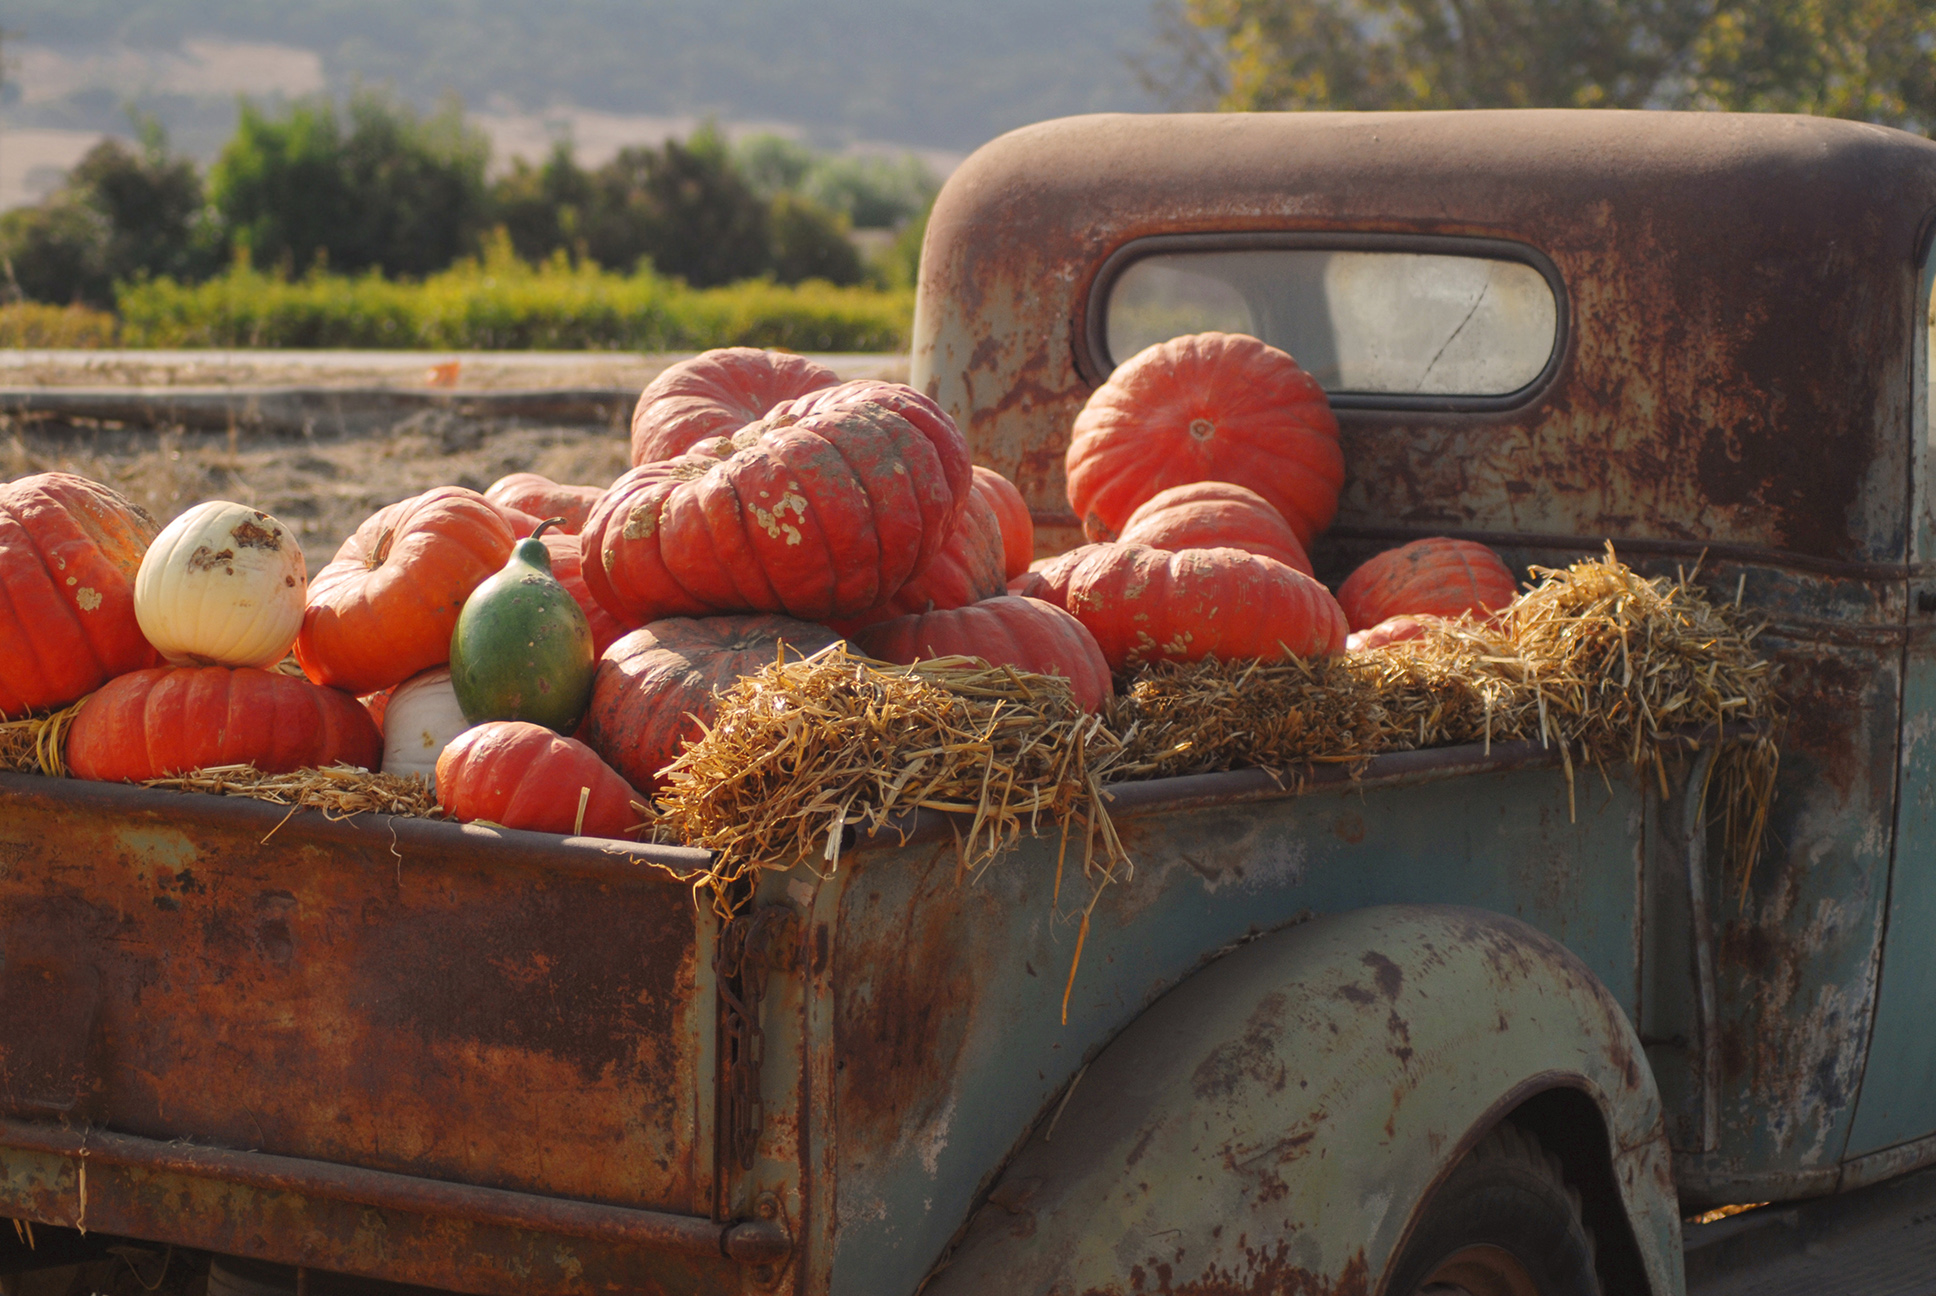 Locally grown pumpkins in the fall on a truck.